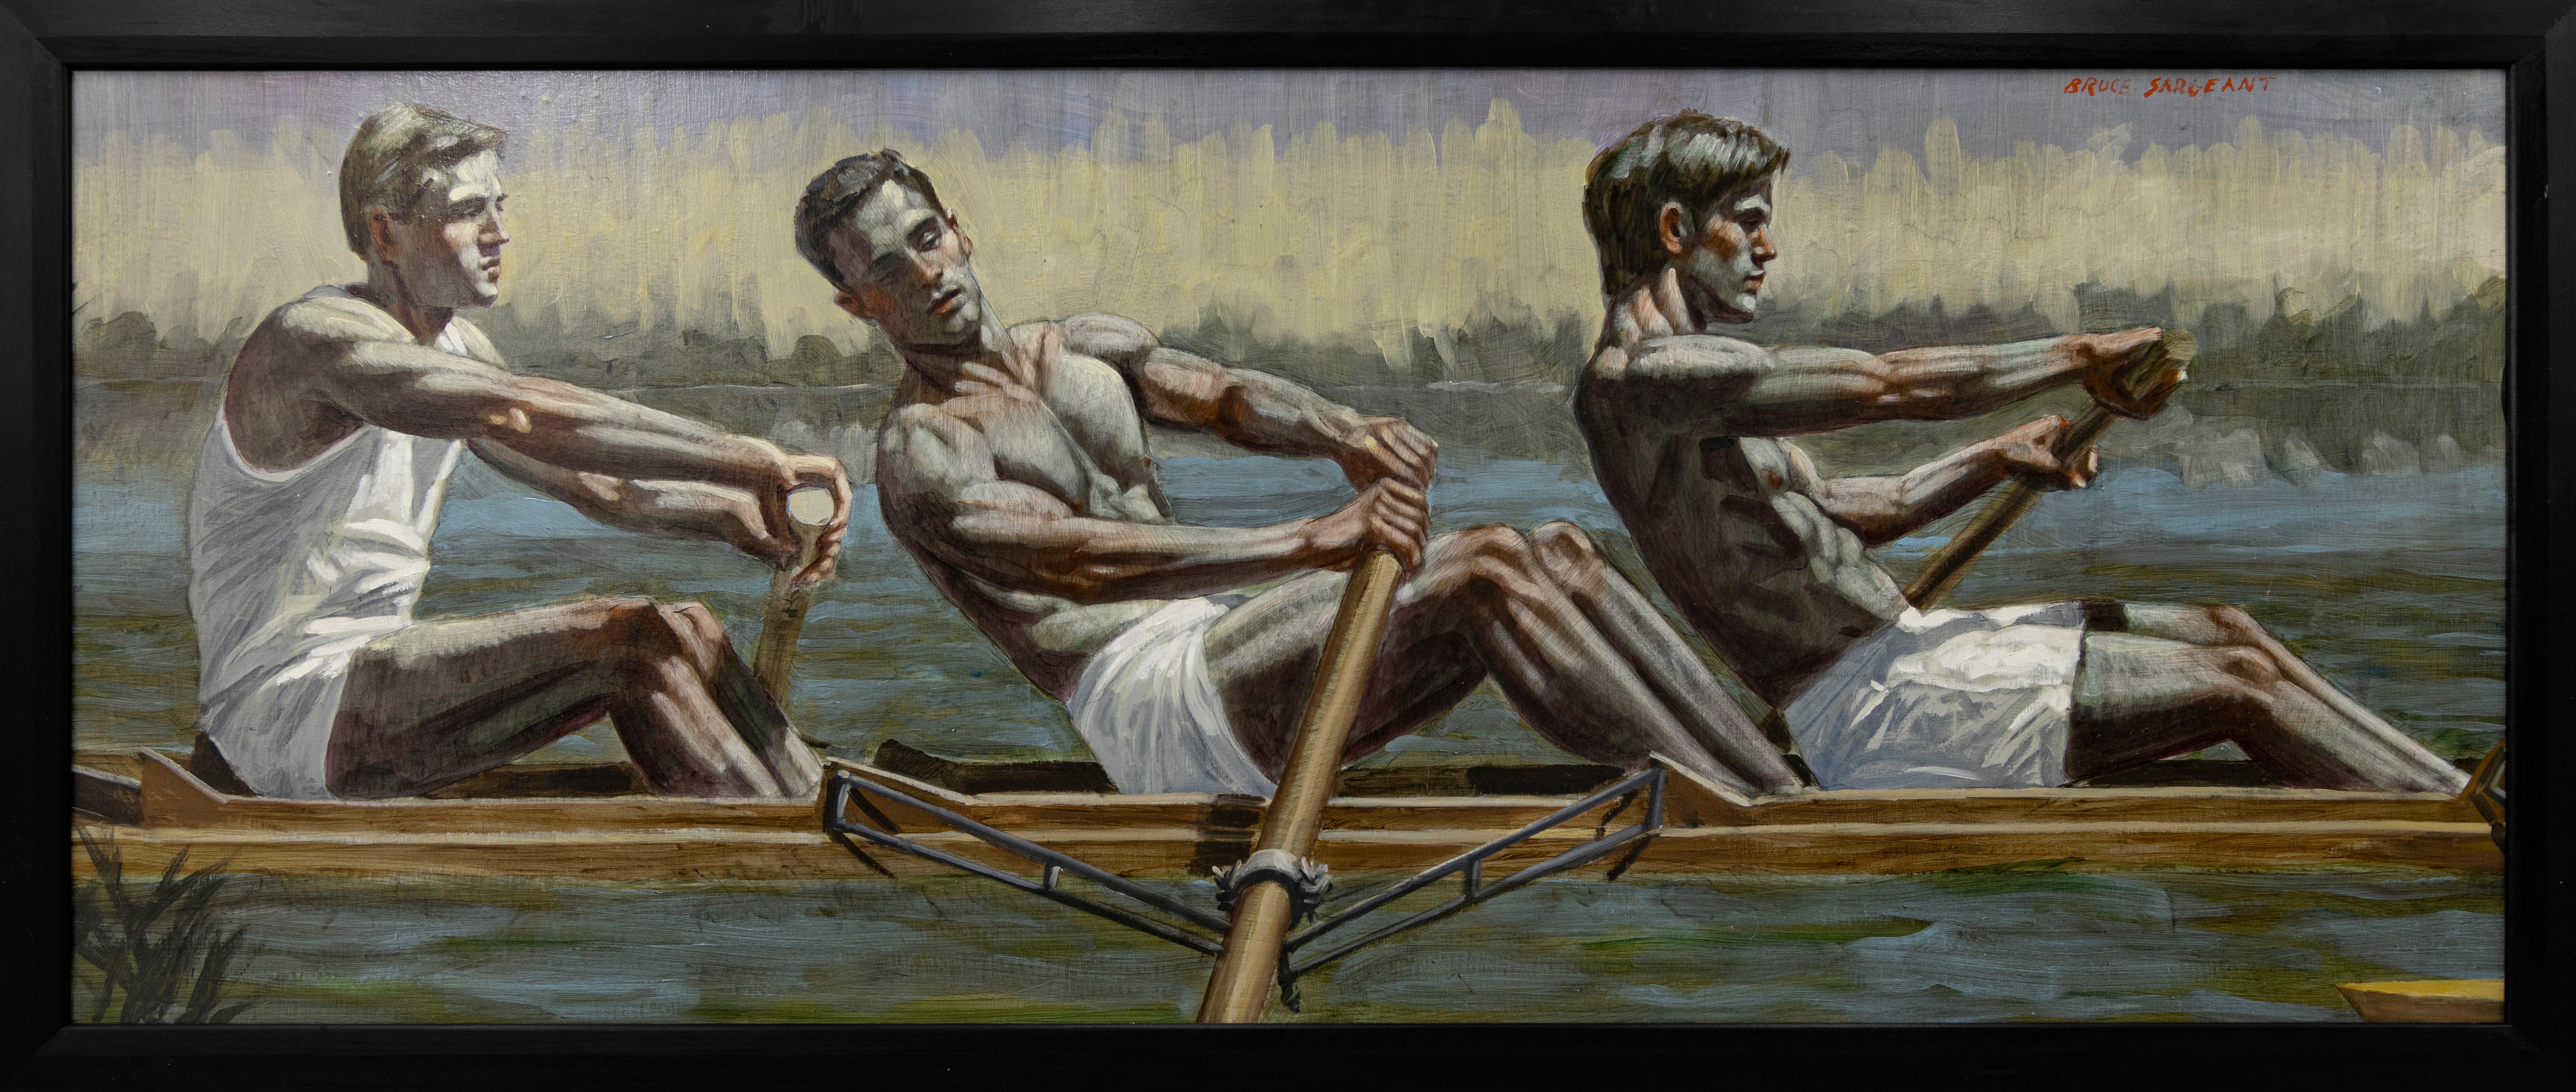 [Bruce Sargeant (1898-1938)] Three Rowers, Gliding Across the Water - Painting by Mark Beard